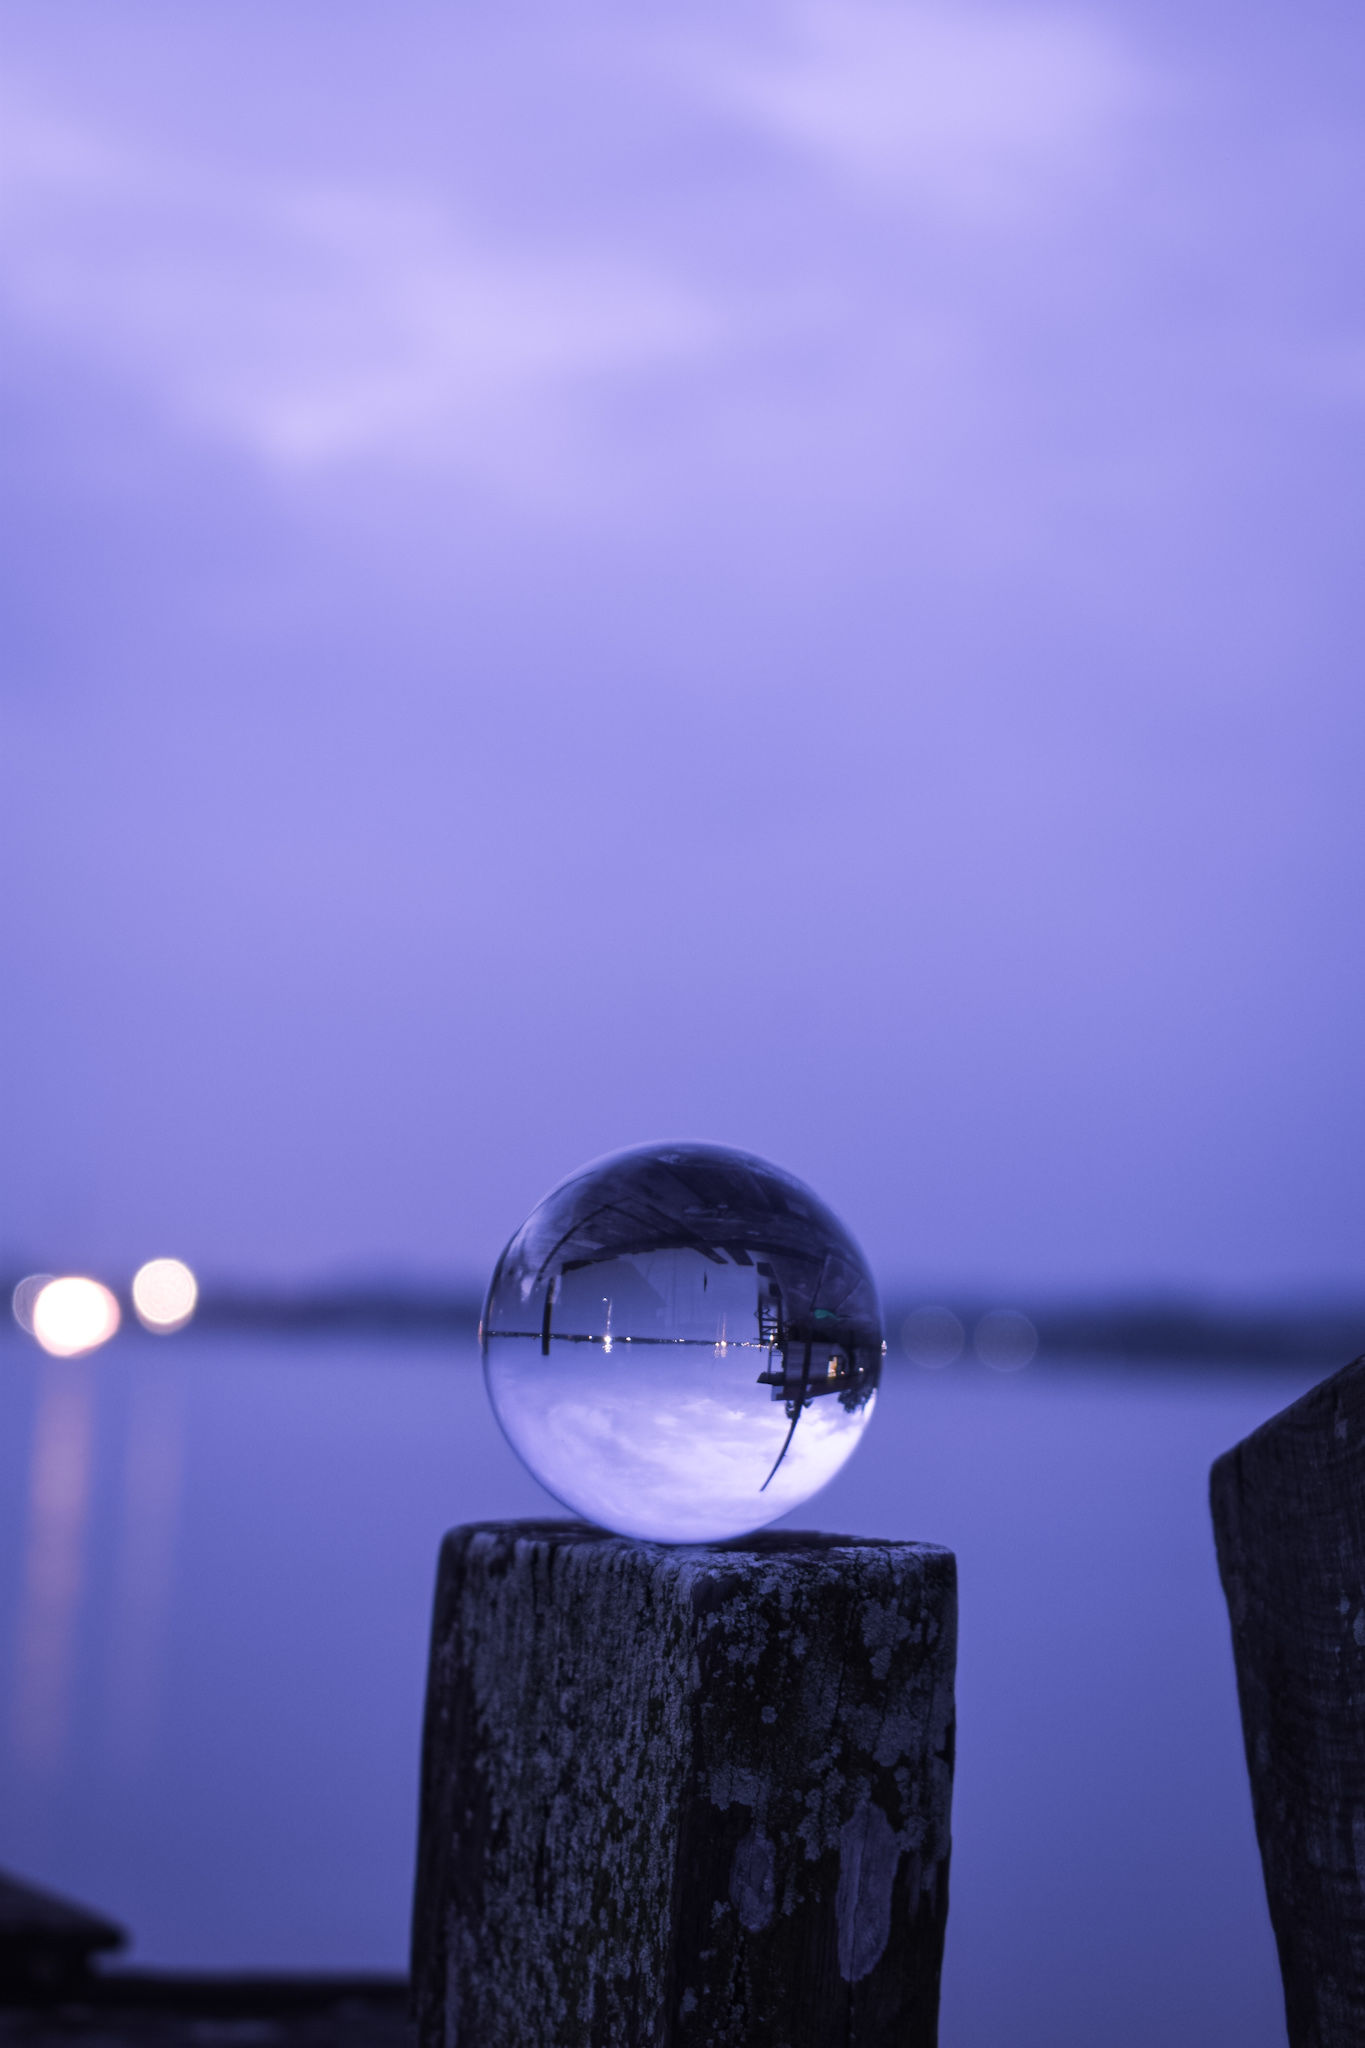 sky, crystal ball, sphere, reflection, focus on foreground, nature, no people, glass - material, close-up, shape, outdoors, water, transparent, geometric shape, dusk, lighting equipment, sunset, day, circle